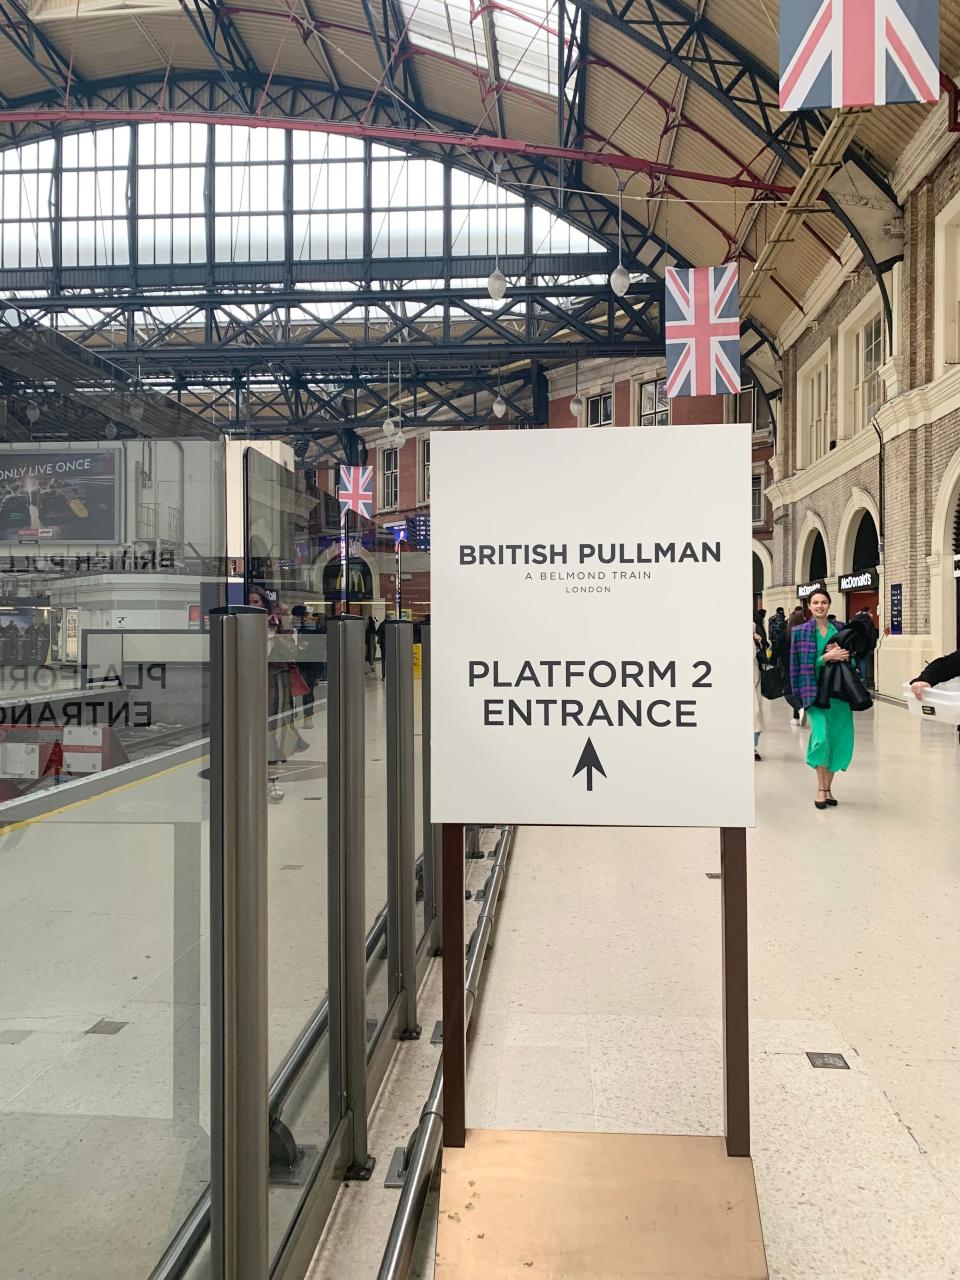 Signs pointing towards the British Pullman train at Victoria Station, London.